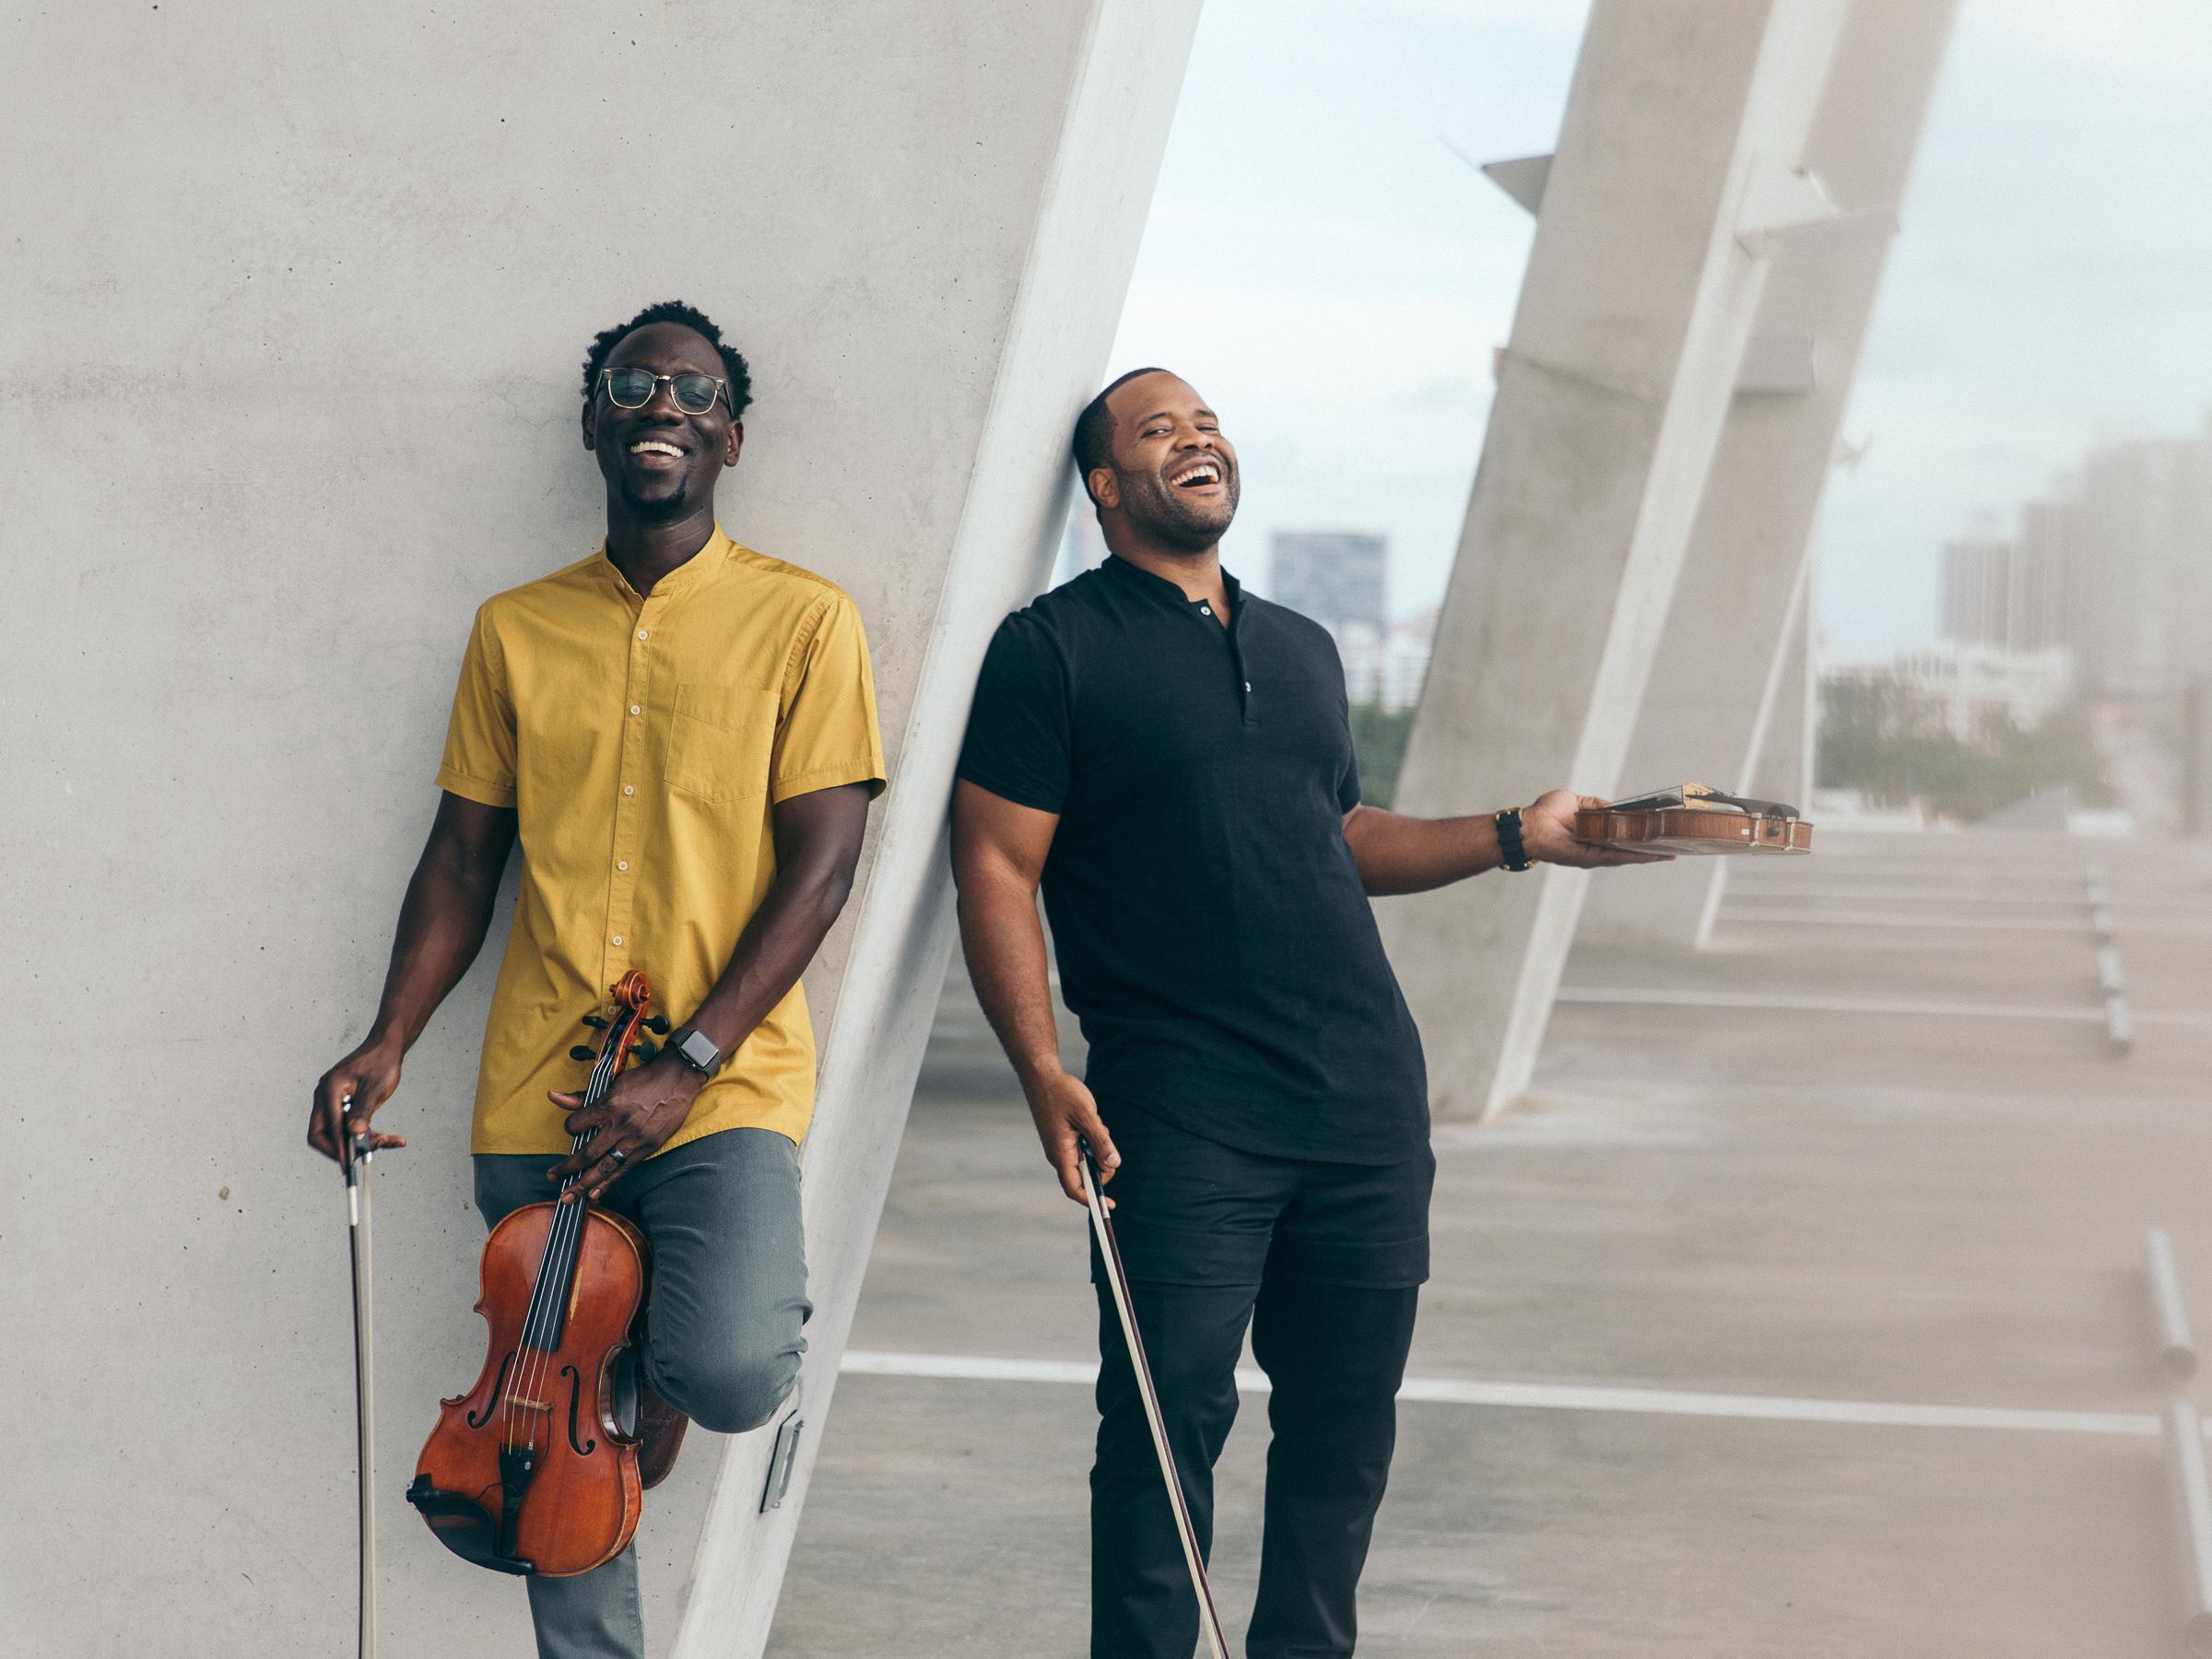 Black Violin merges classical with hip hop music